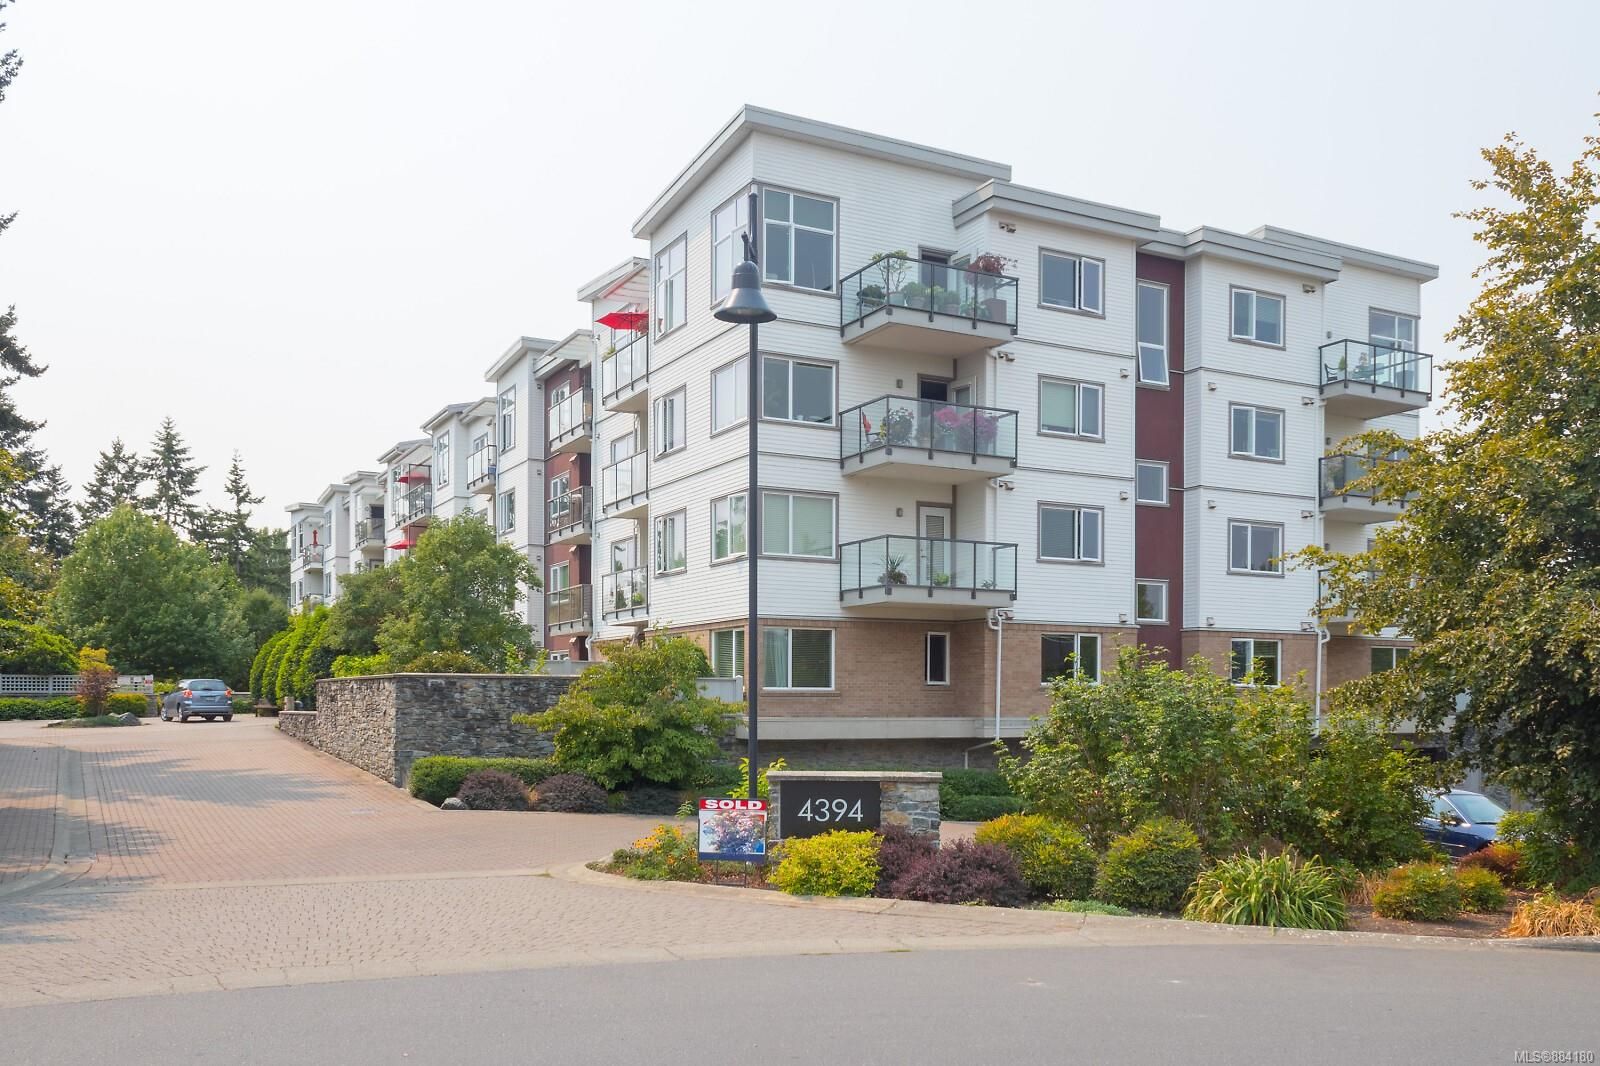 I have sold a property at 406 4394 West Saanich Rd
